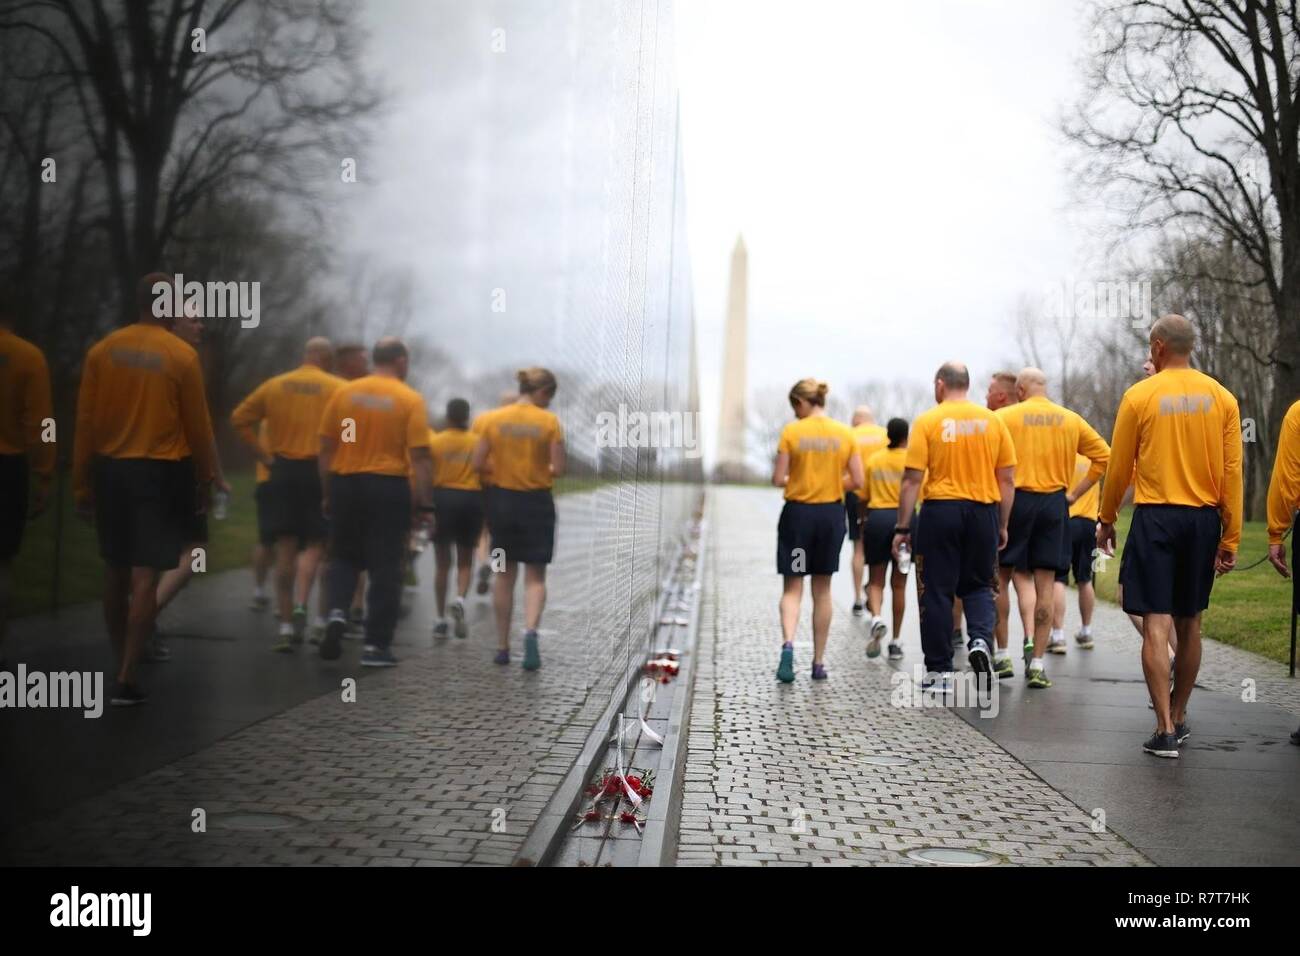 WASHINGTON (April 4, 2017) Navy Reserve Sailor of the Year finalists and members of the Reserve Sailor of the Year selection board visit the Vietnam Veterans Memorial during a run at the National Mall as part of the Reserve Sailor of the Year selection board and recognition ceremony week. Chief of Naval Operations Adm. Elmo Zumwalt and Master Chief Petty Officer of the Navy Jack Whittet initiated the Sailor of the Year program in 1972 to recognize outstanding Atlantic and Pacific Fleet Sailors. Stock Photo